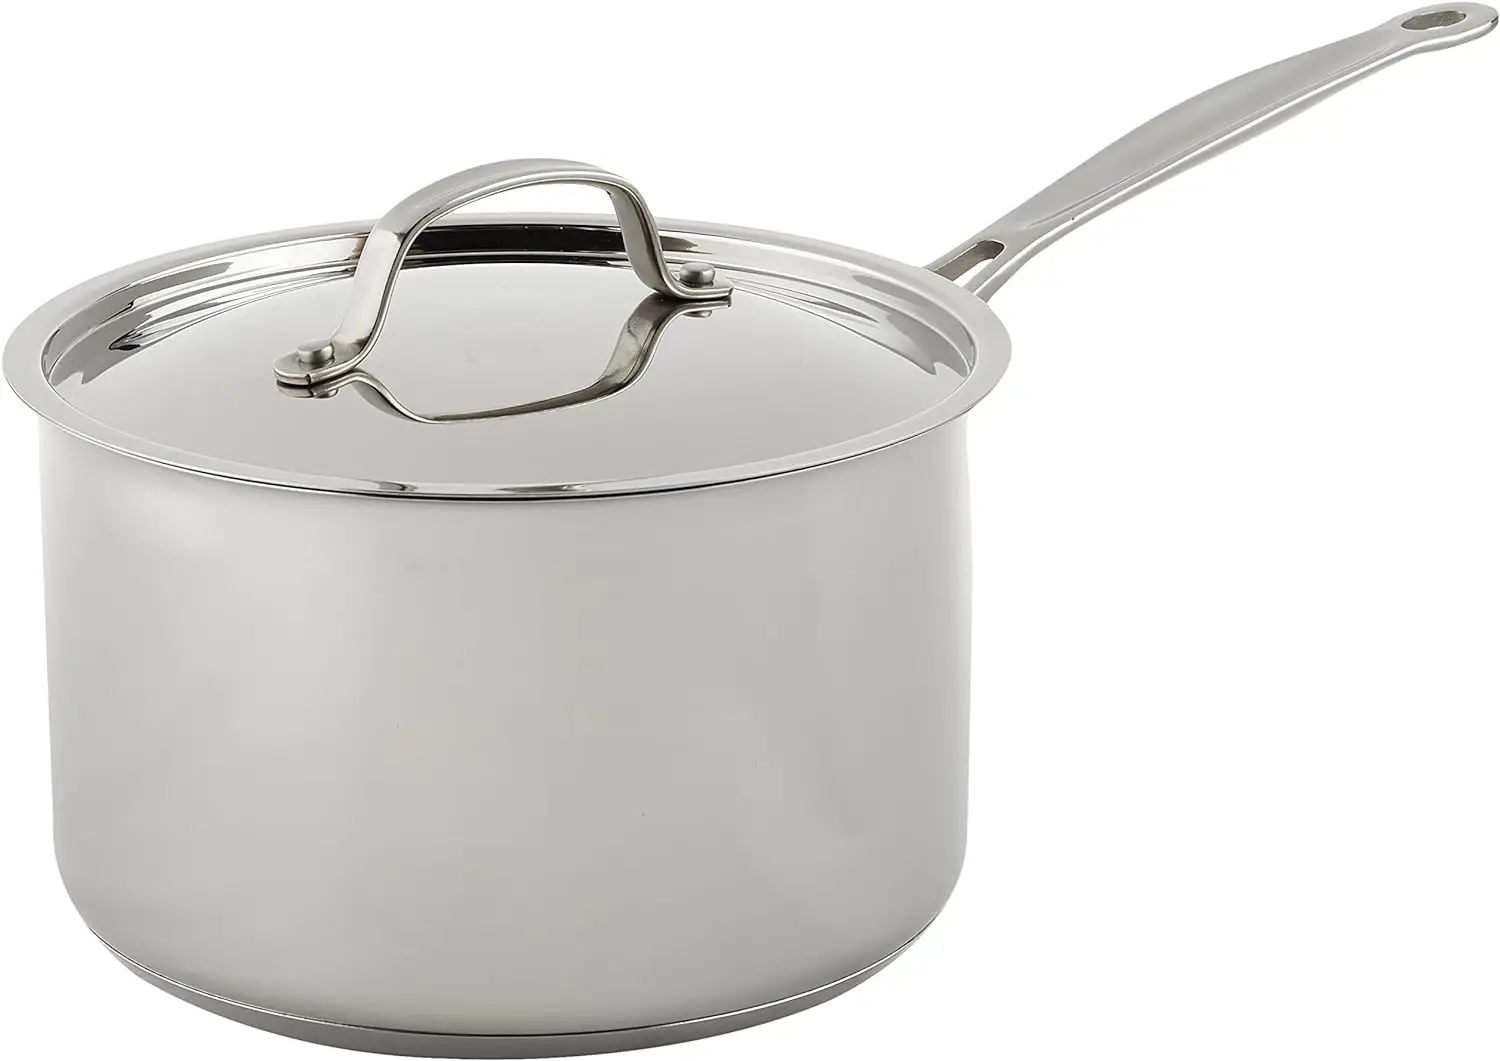 

Chef's Classic Stainless 4-Quart Saucepan with Cover Egg pan Stainless steel Big cooking pot stainless steel Cooking accessories